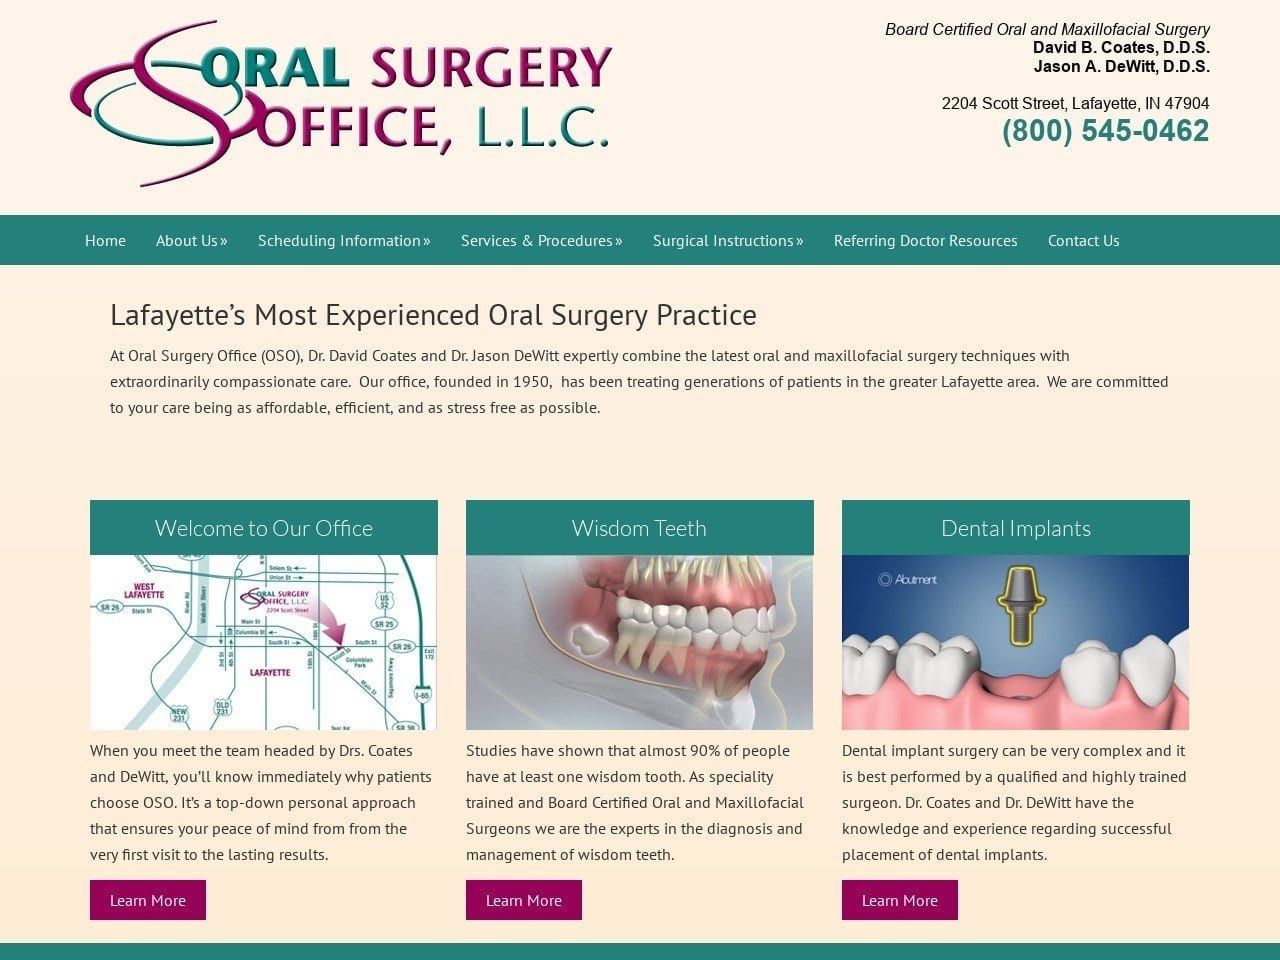 Oral Surgery Office Website Screenshot from osolafayette.com